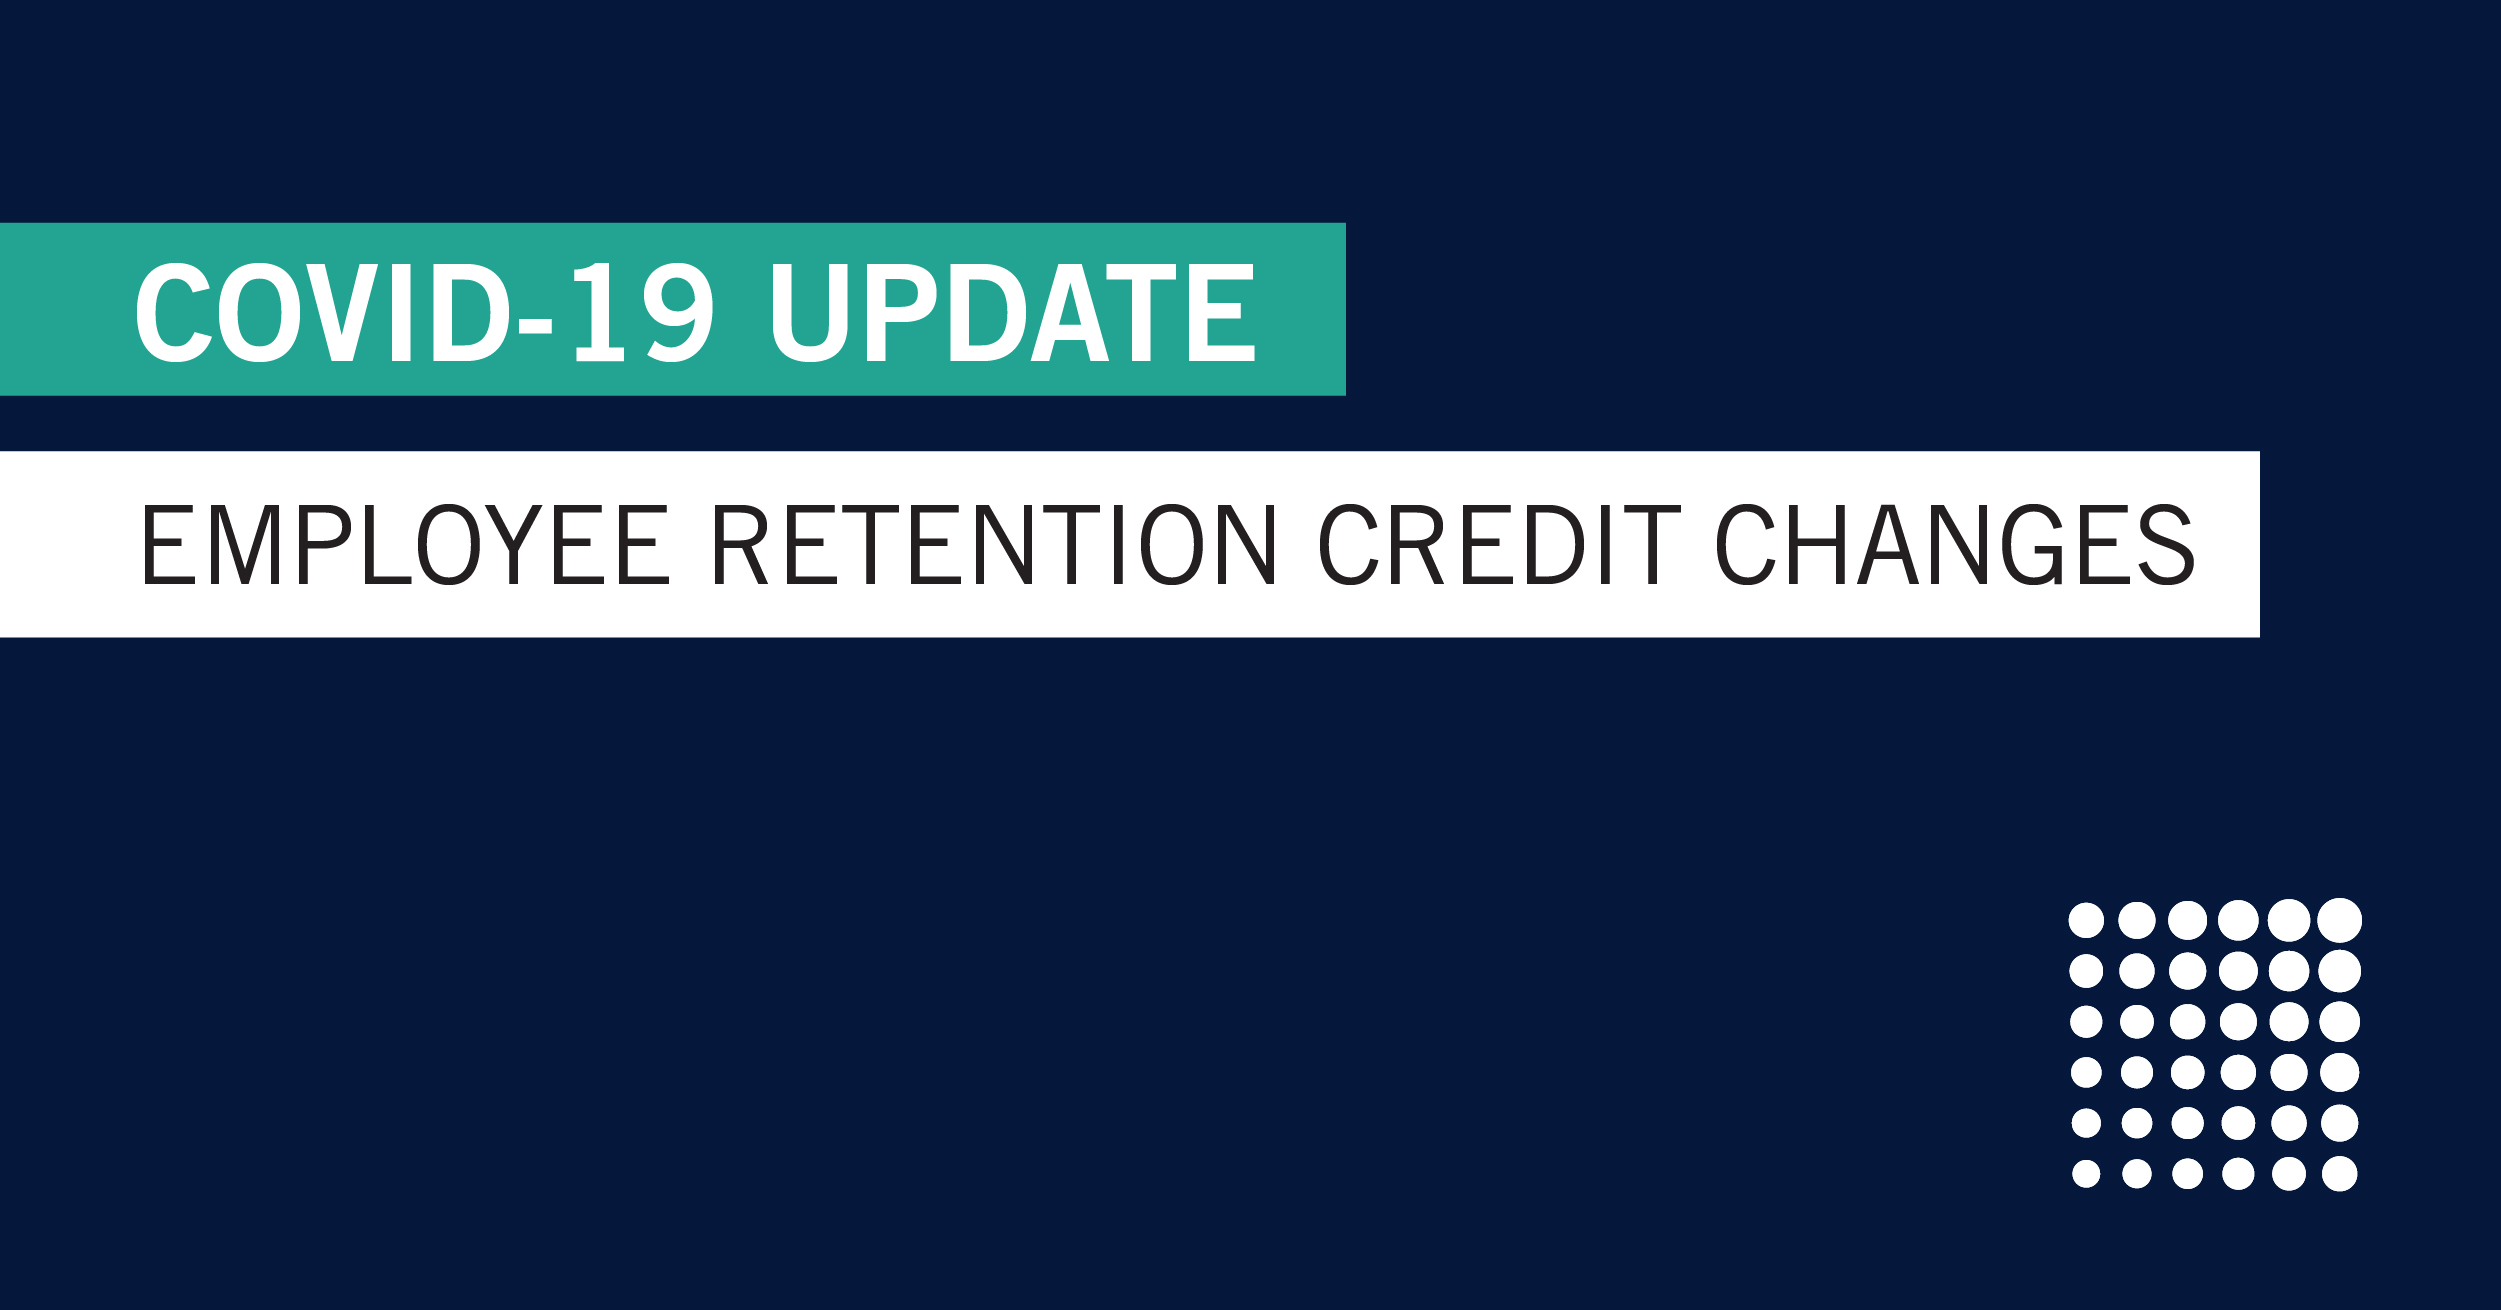 Changes to the Employee Retention Credit (ERC)